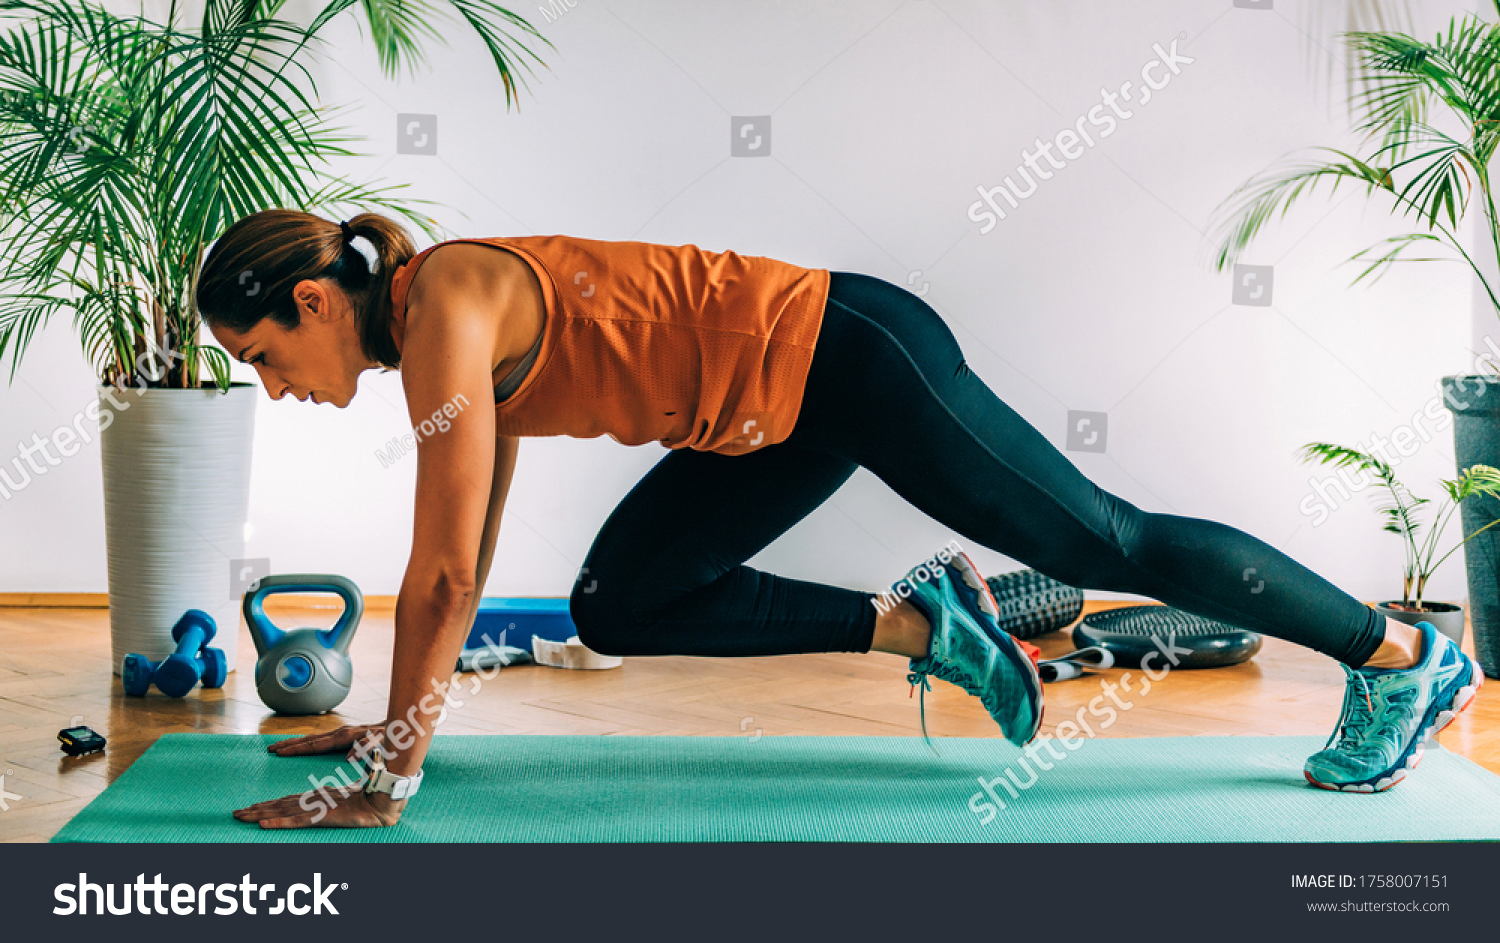 Mountain climbers, Woman Exercising Indoors, HIIT or high intensity interval training at home #1758007151